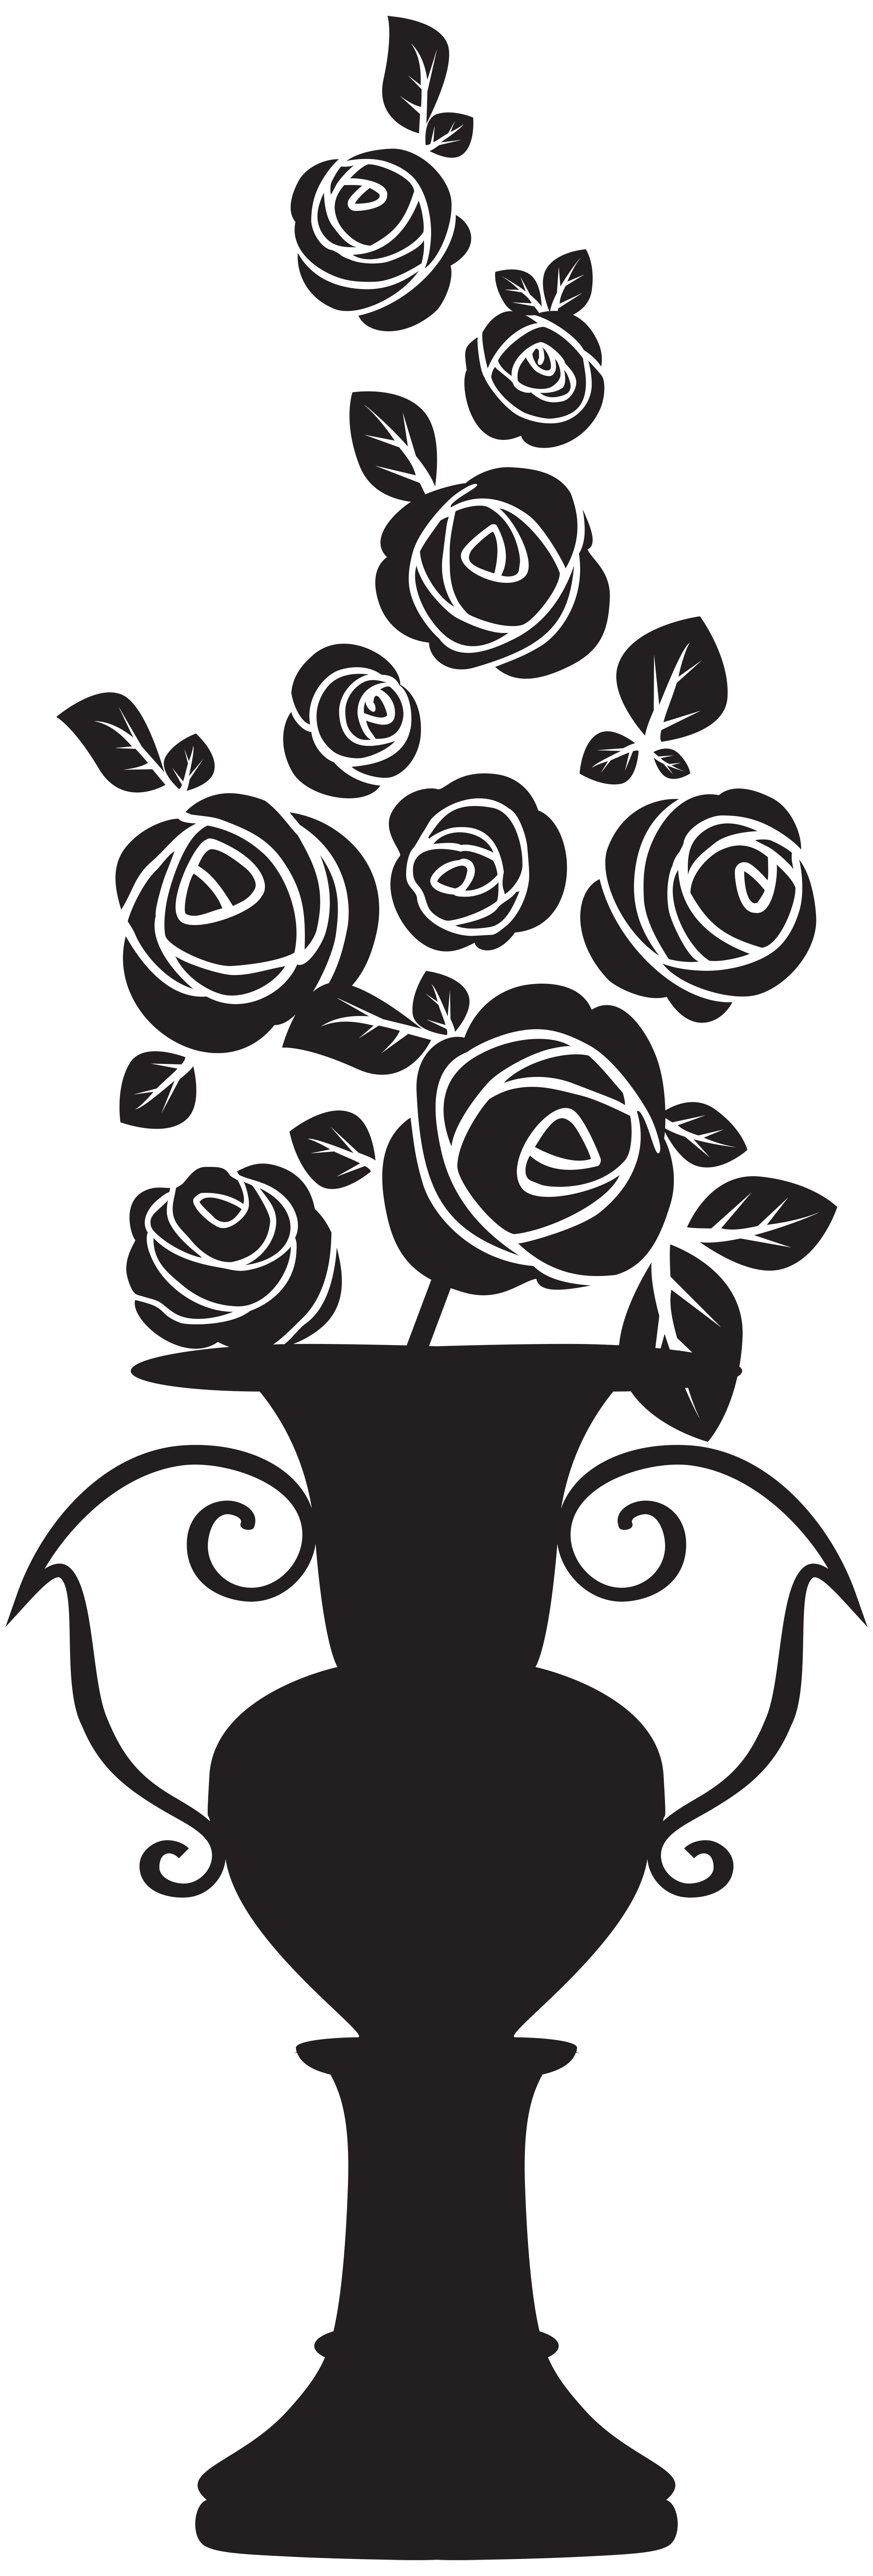 Silhouette Drawing Clip art - Vase with Roses Silhouette ... - Black and White Rose Painting